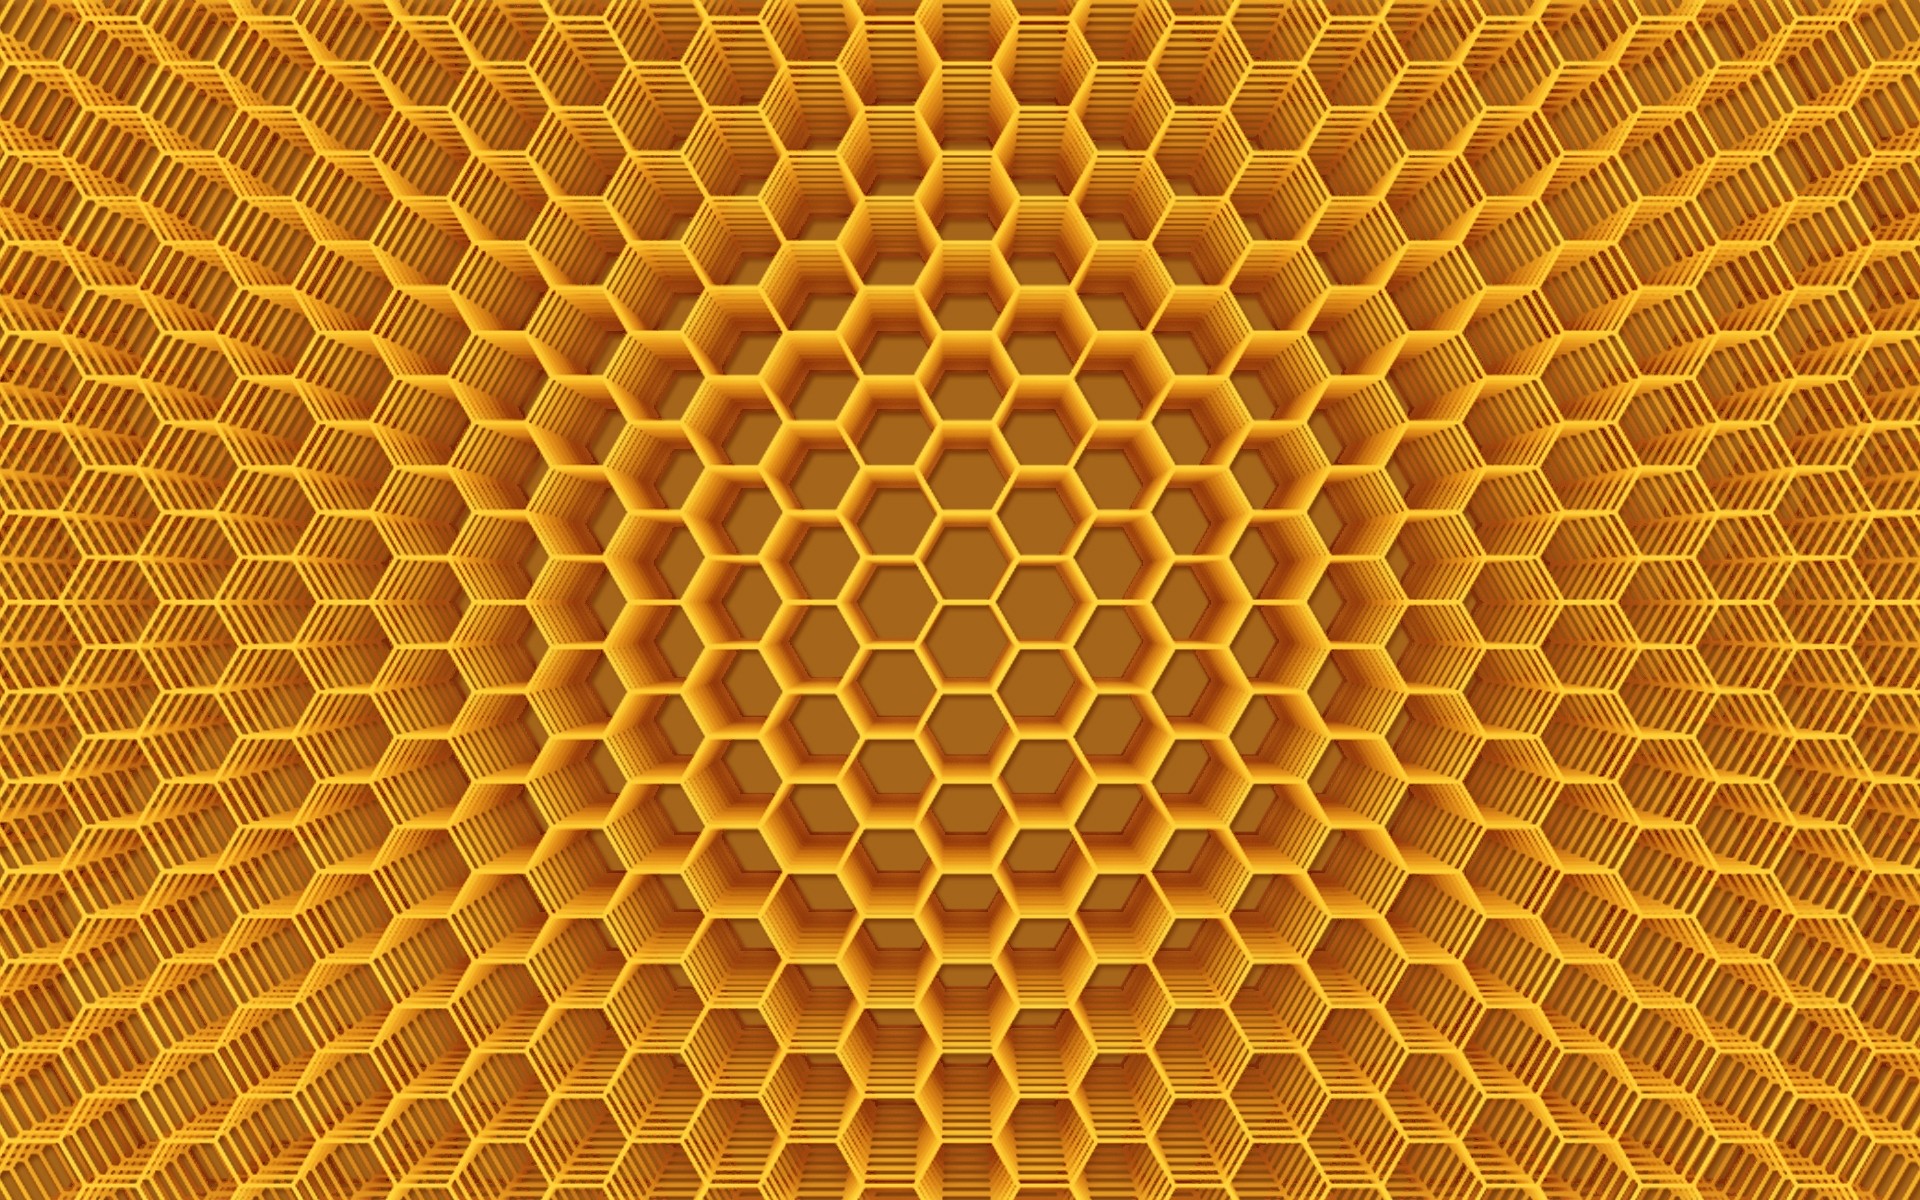 Abstract Honeycomb Structure - Phone wallpapers